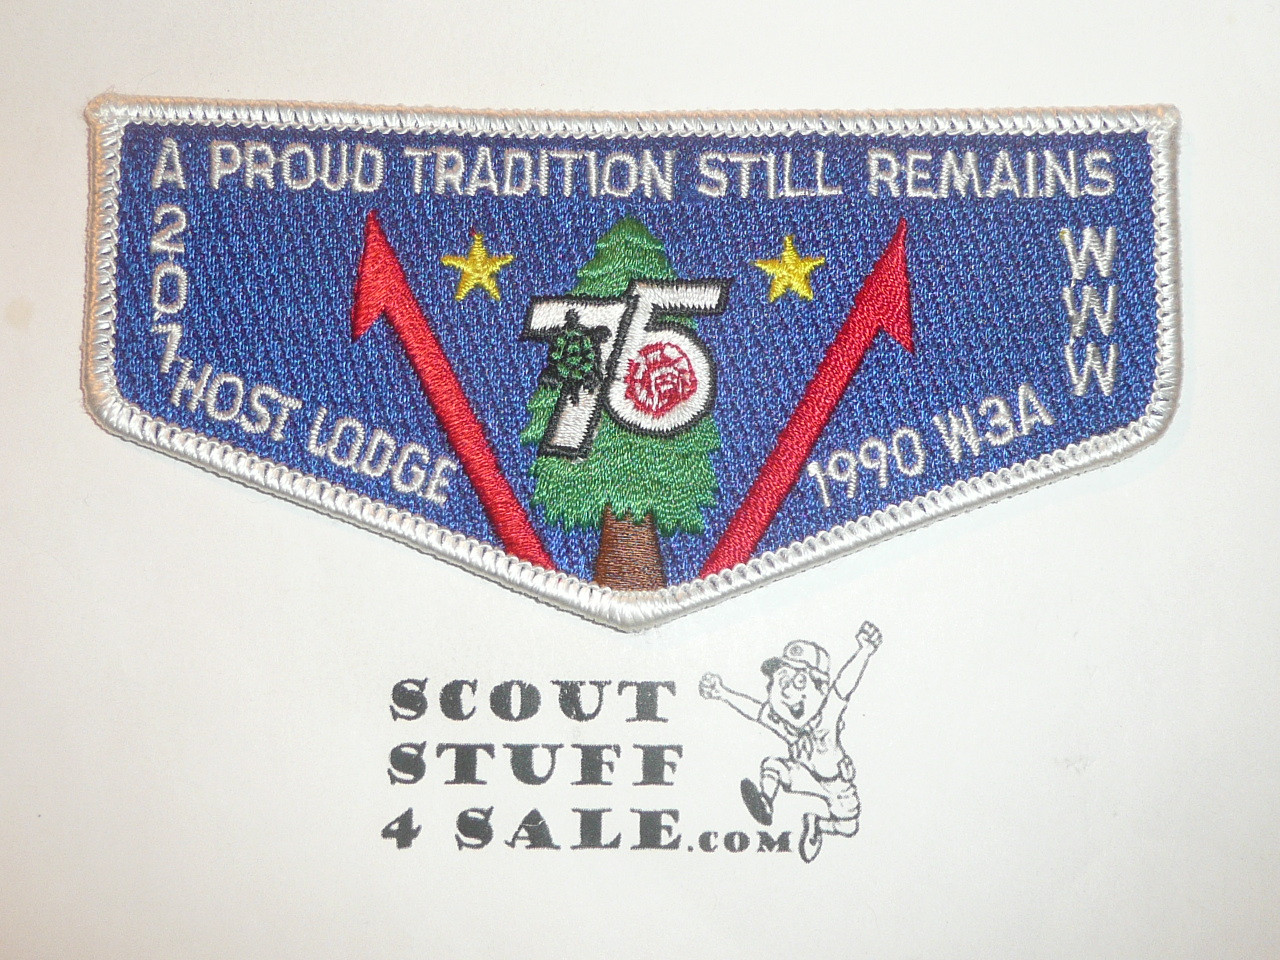 Order of the Arrow Lodge #207 Stanford-Oljato s18 Flap Patch